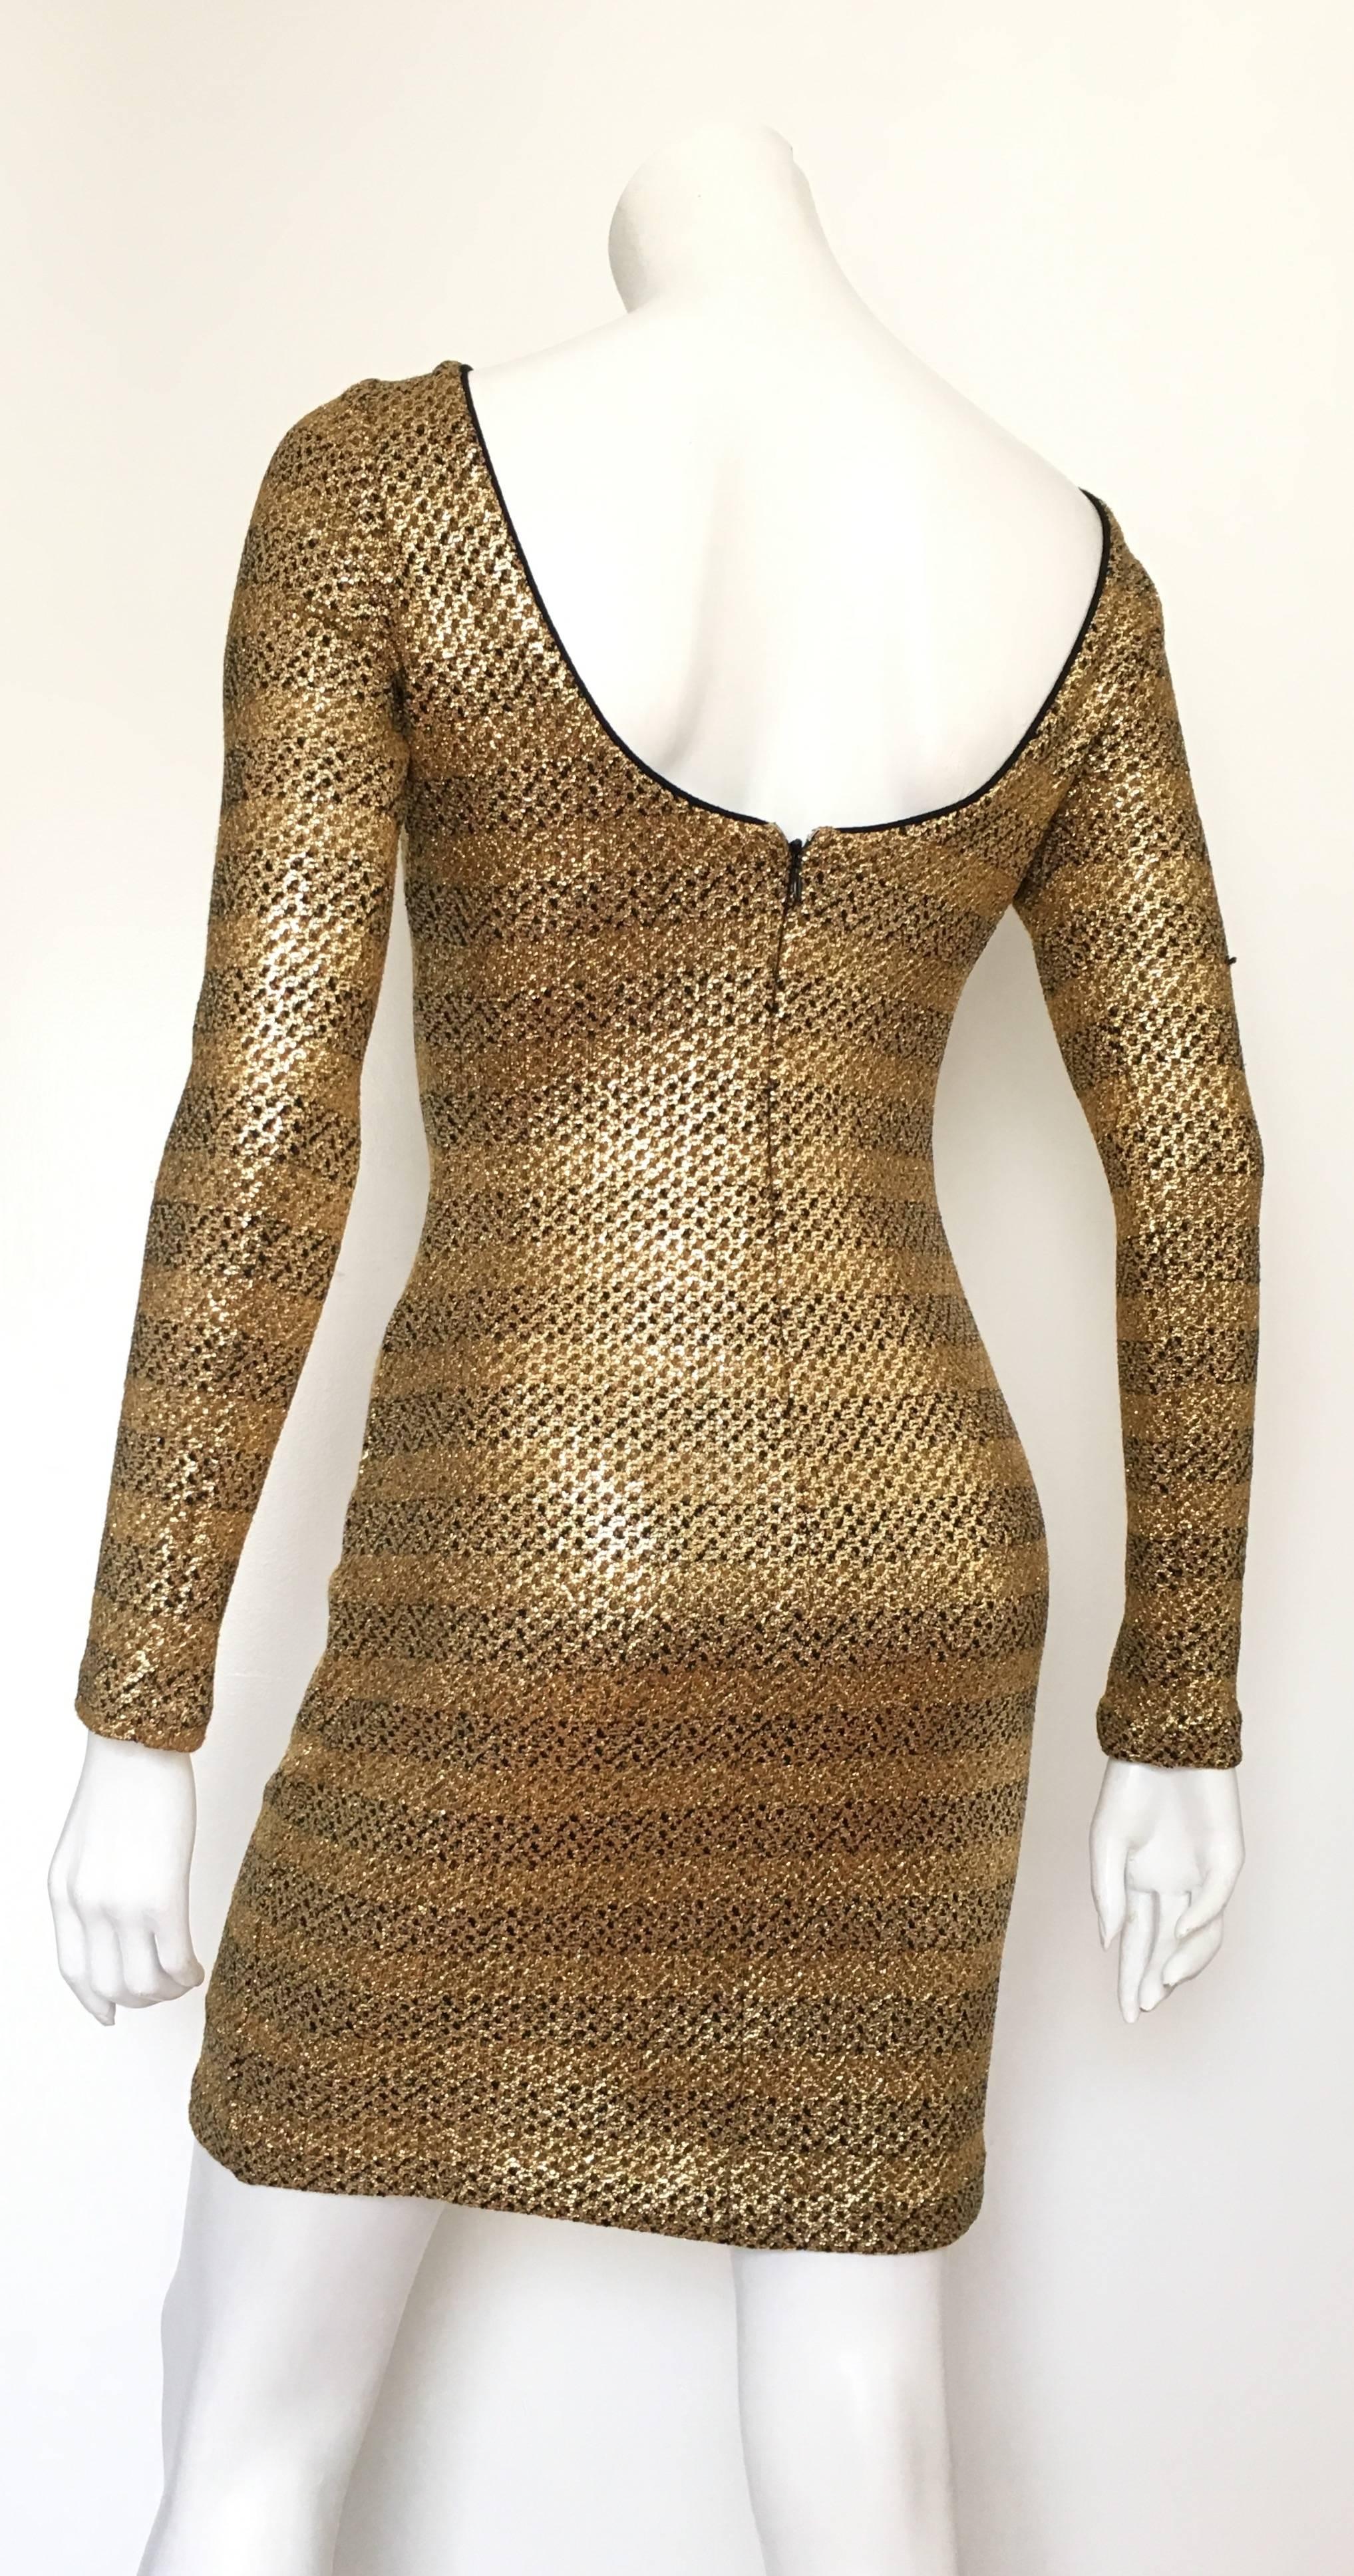 Badgley Mischka Gold Metallic Stretch Cocktail Dress Size 2 / 4. In Excellent Condition For Sale In Atlanta, GA